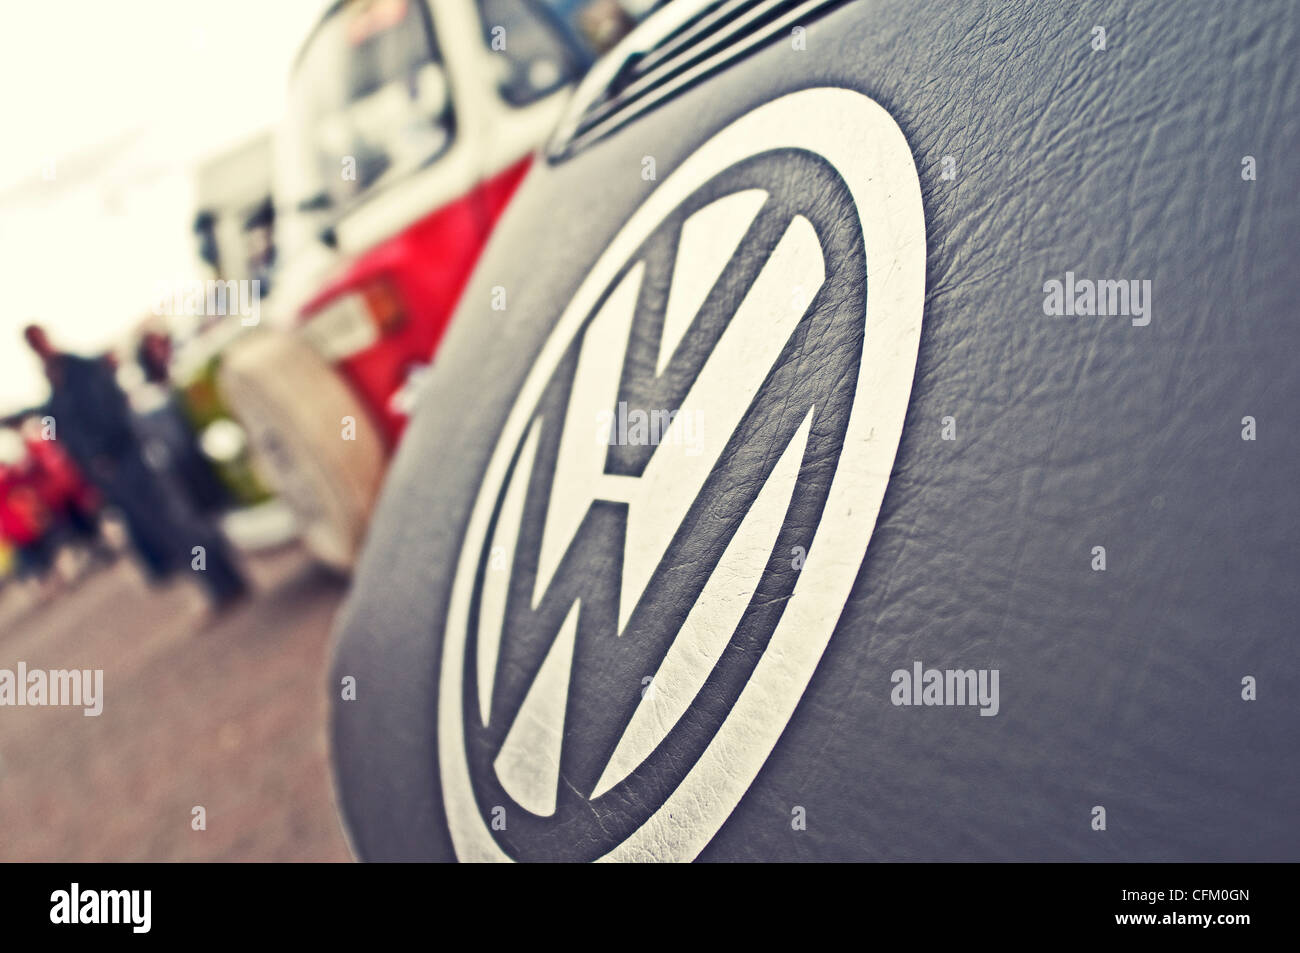 A Volkswagen Vw Vehicle Logo At A Vw Classics Show Uk Stock Photo Alamy